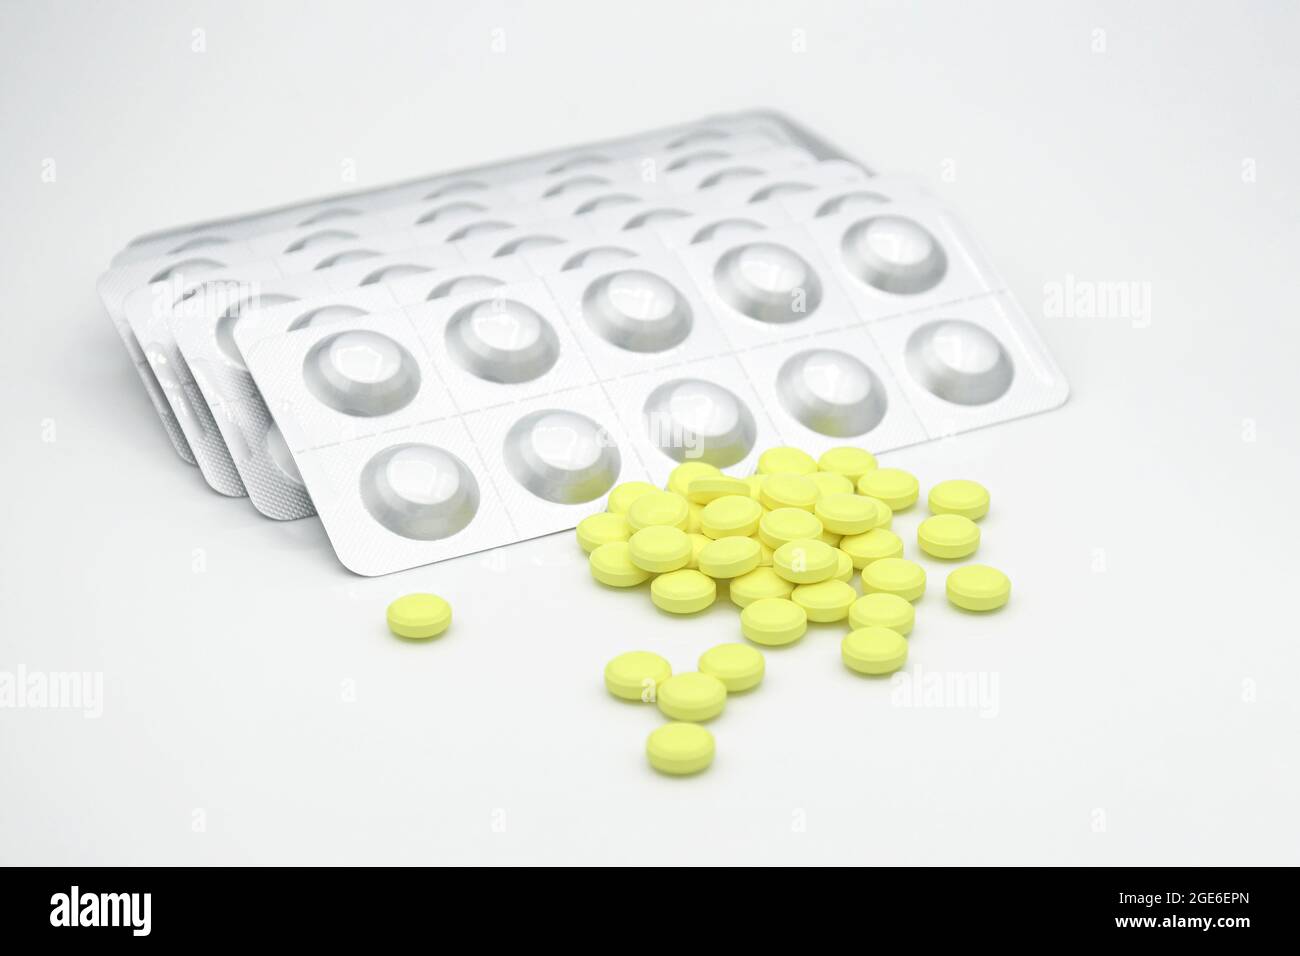 Yellow round film-coated tablet with aluminium hard strip on white background. Some oral dosage form of Favipiravir, antiviral agents. Stock Photo